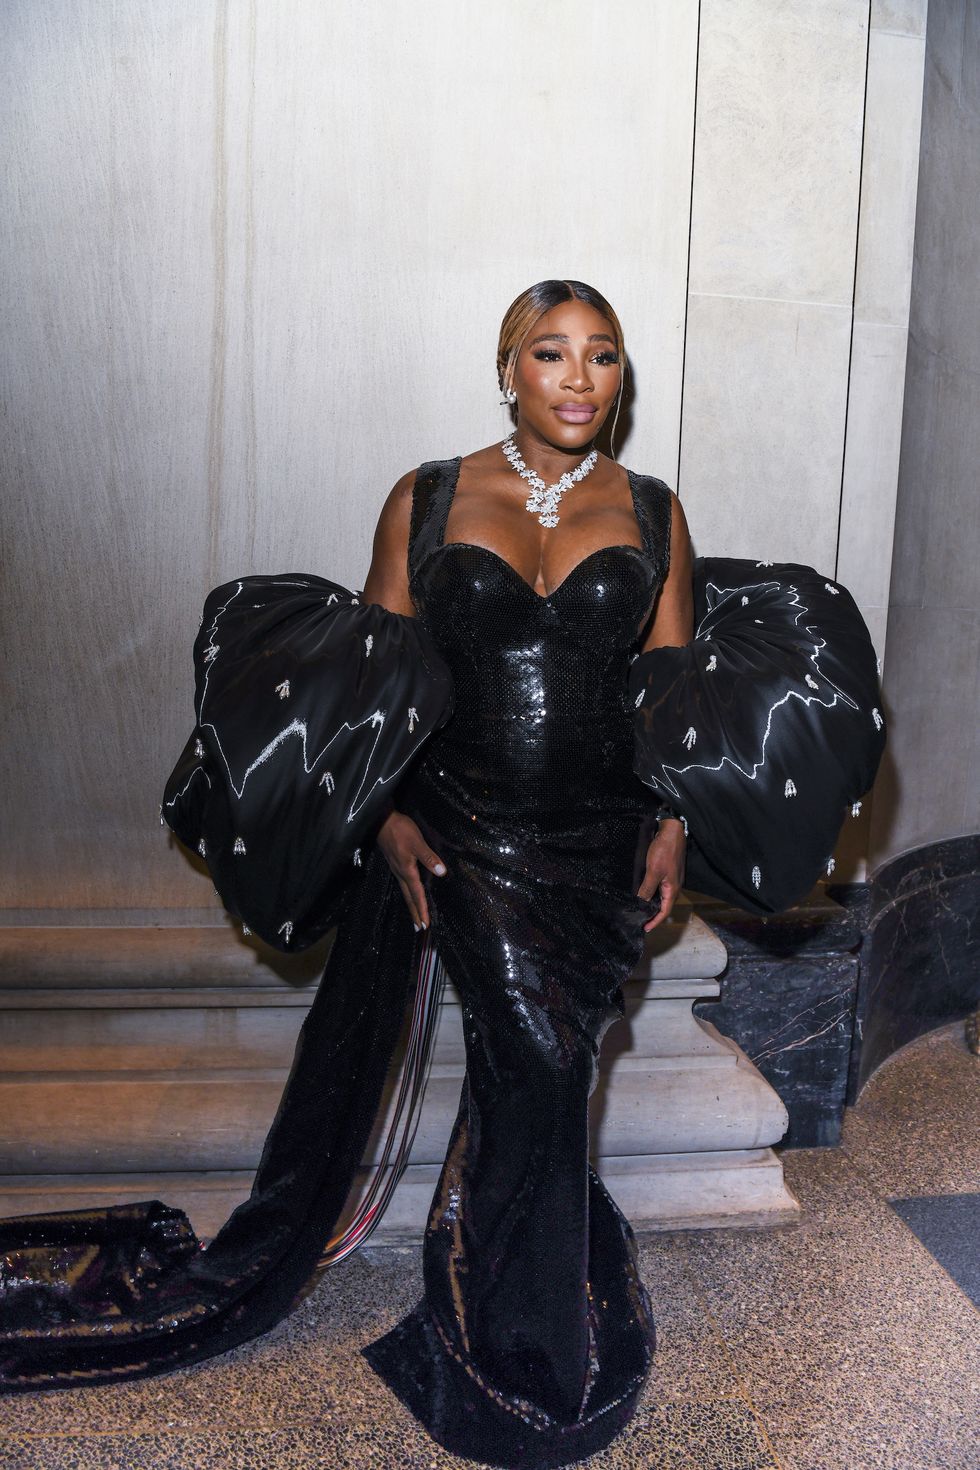 Great Outfits in Fashion History: Serena Williams in a Studded